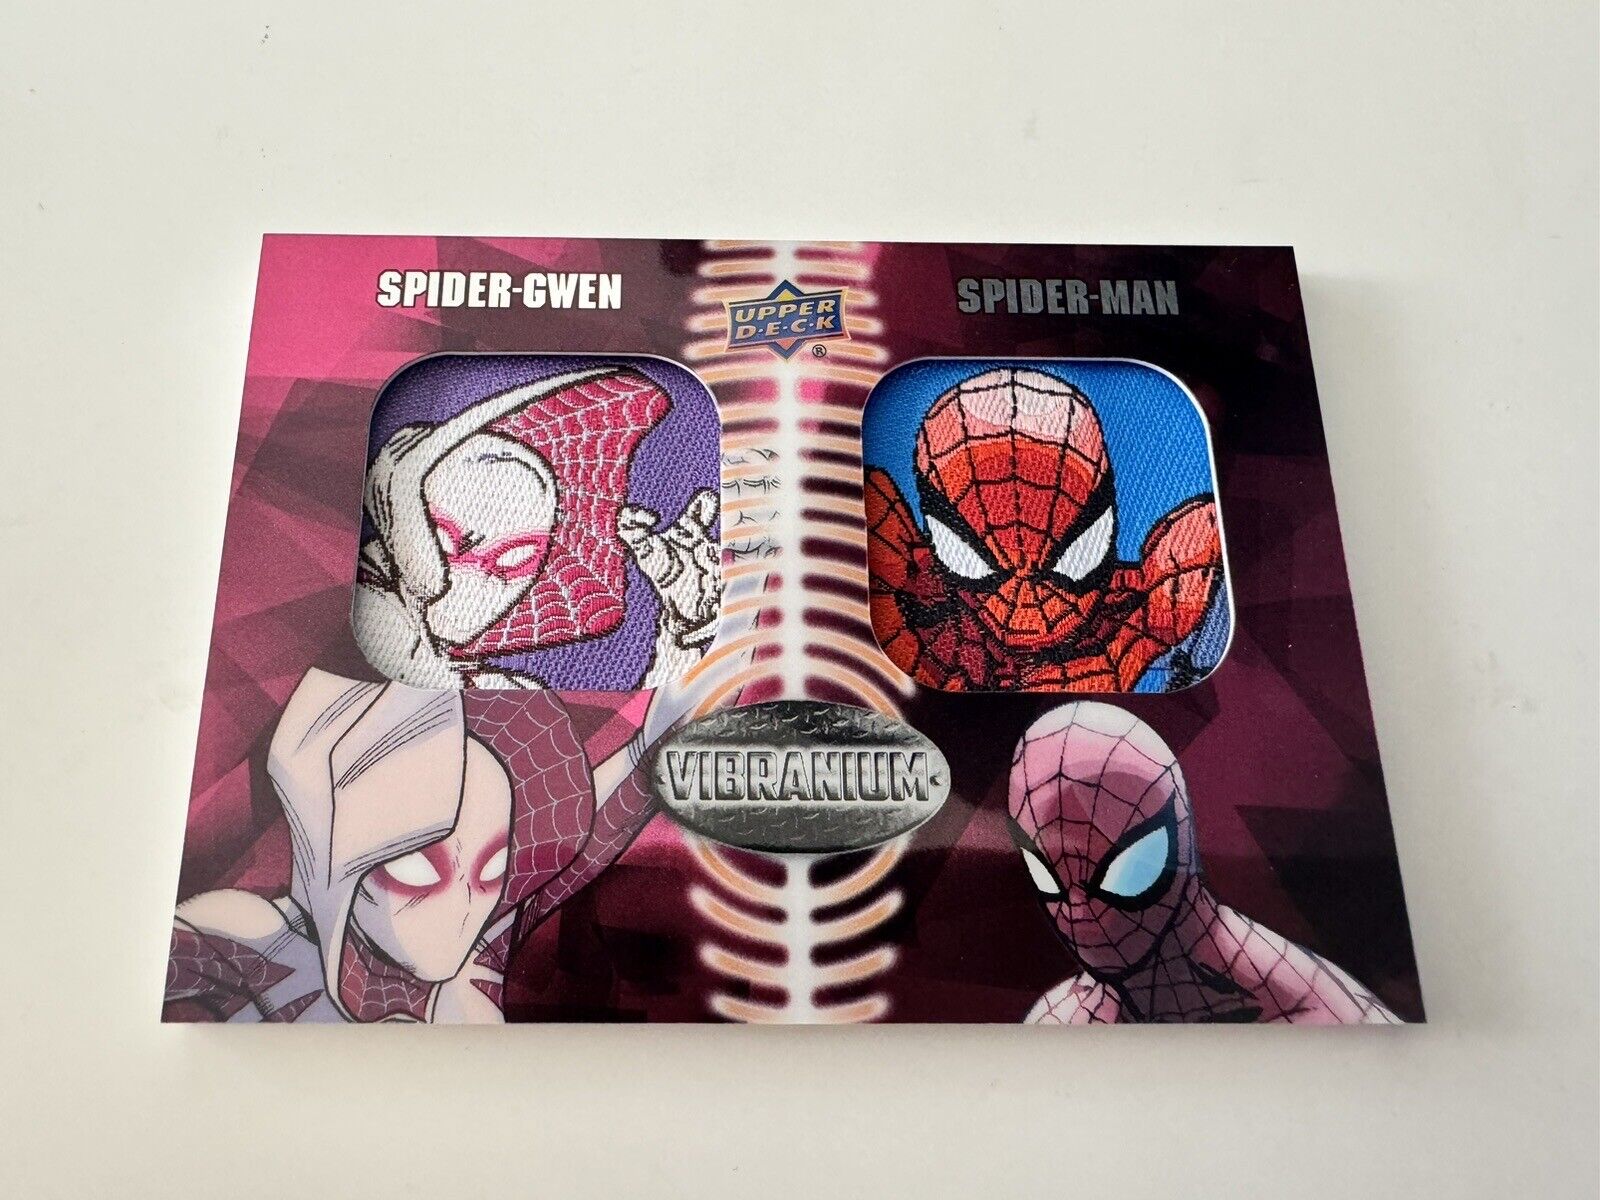 2015 UD Marvel Vibranium Double Patches Spider-Gwen Ultimate Spider-Man Card